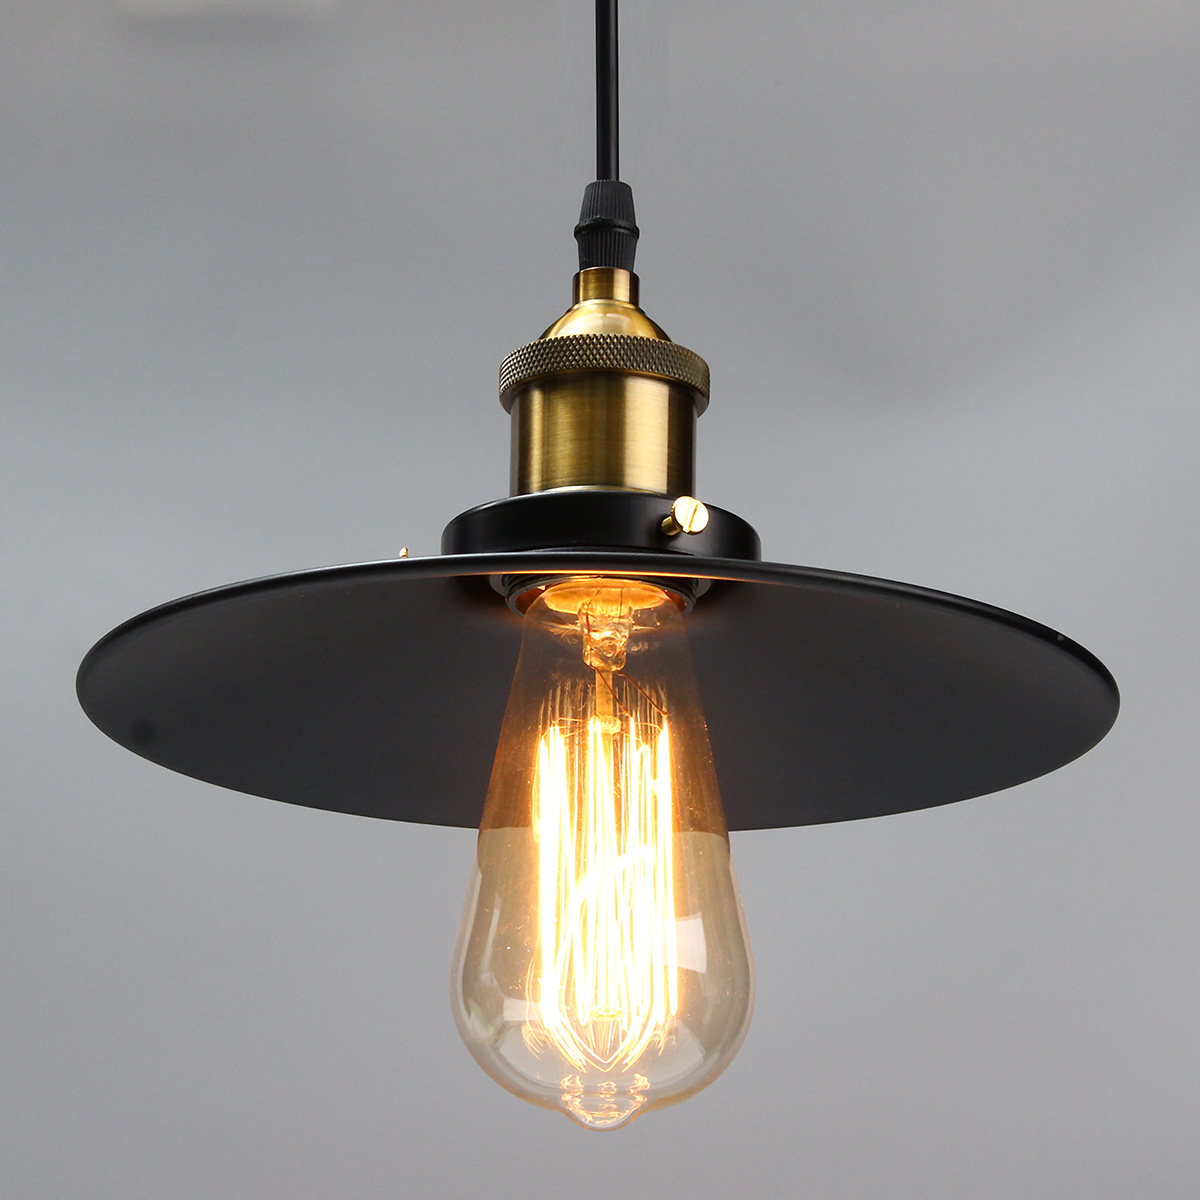 Find E27 Industrial Retro Vintage Iron Triangle/Round Plate Ceiling Lamp Pendant Light Chandelier Fixture for Sale on Gipsybee.com with cryptocurrencies